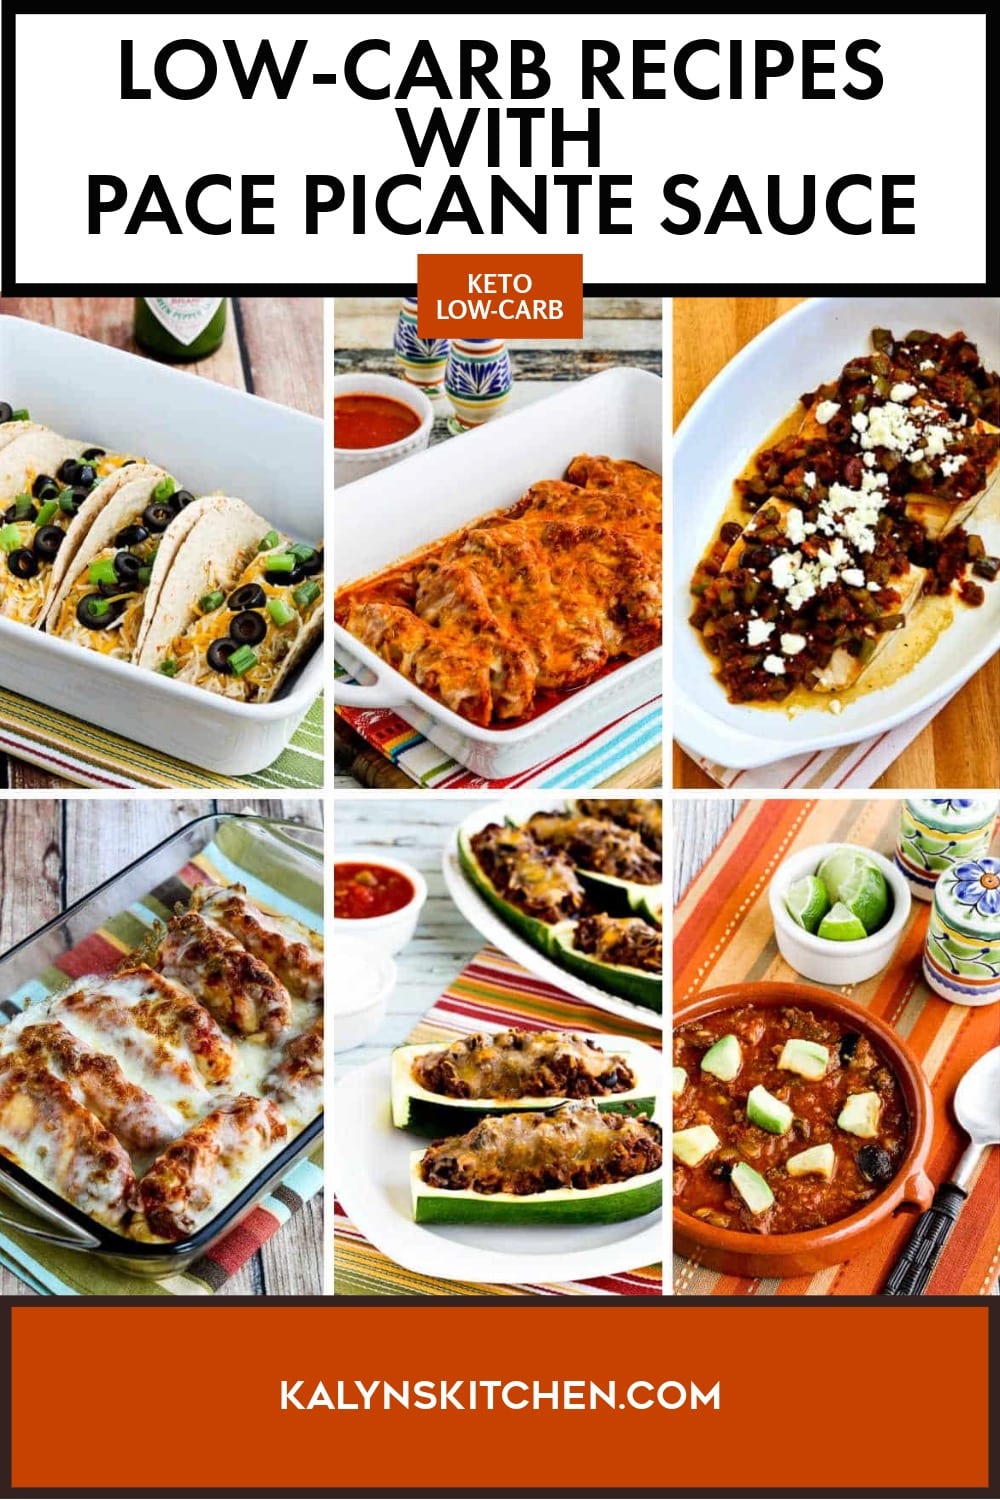 Pinterest image of Low-Carb Recipes with Pace Picante Sauce